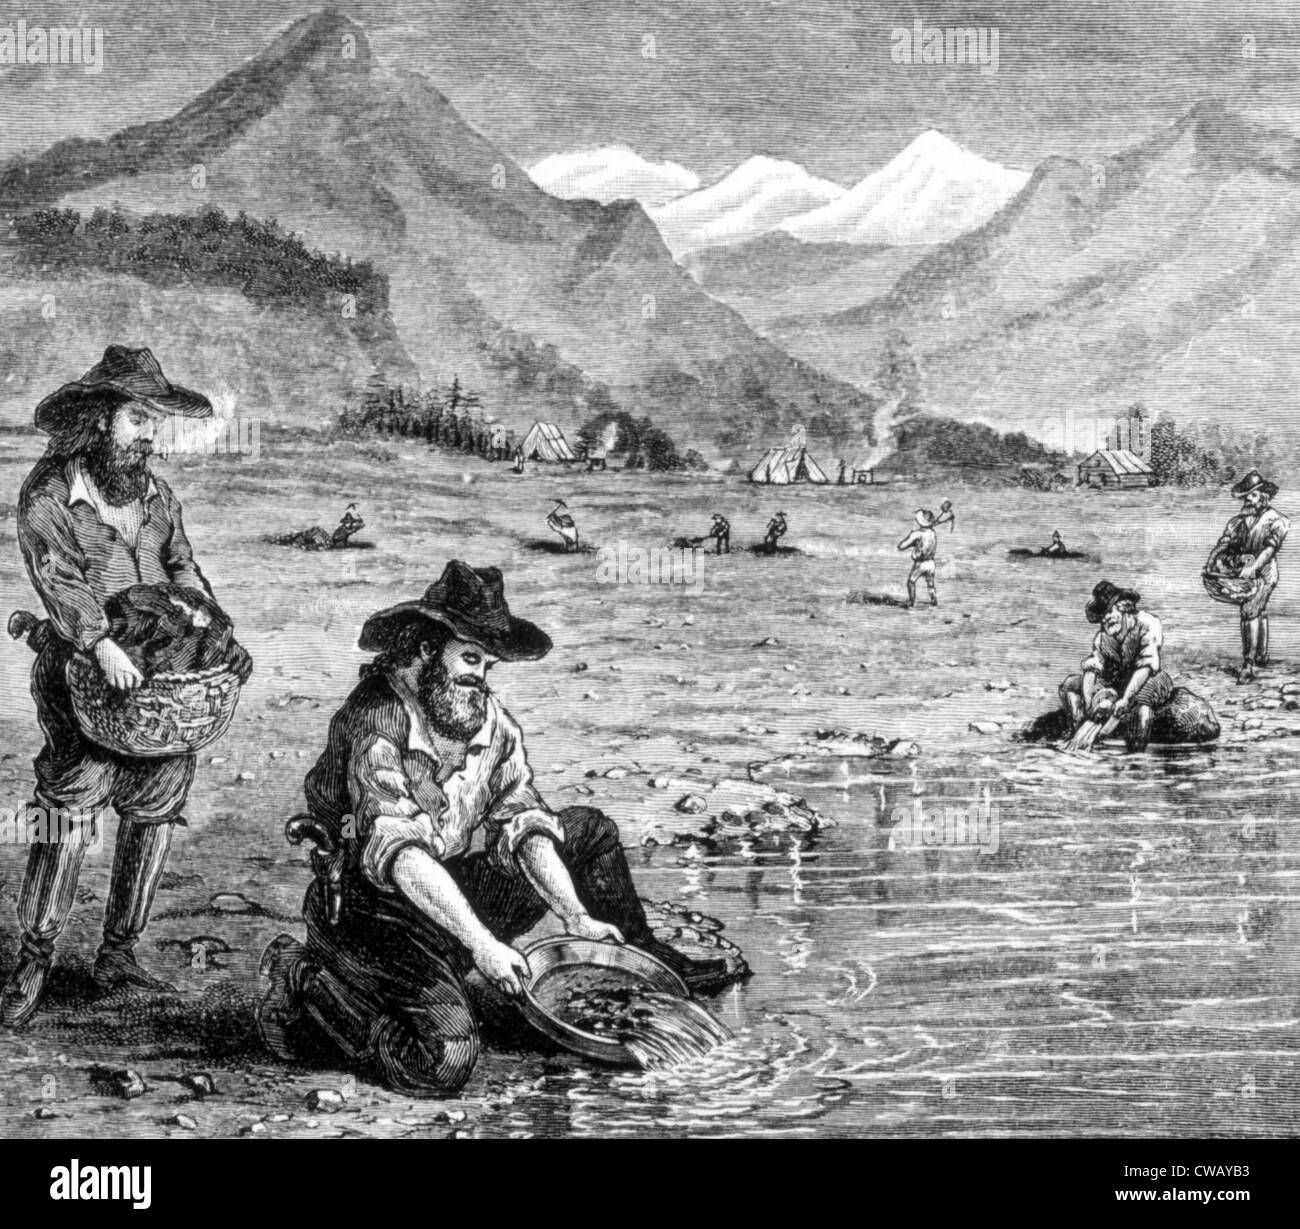 The Gold Rush, panning for gold in California, 1849, engraving 1891 Stock Photo